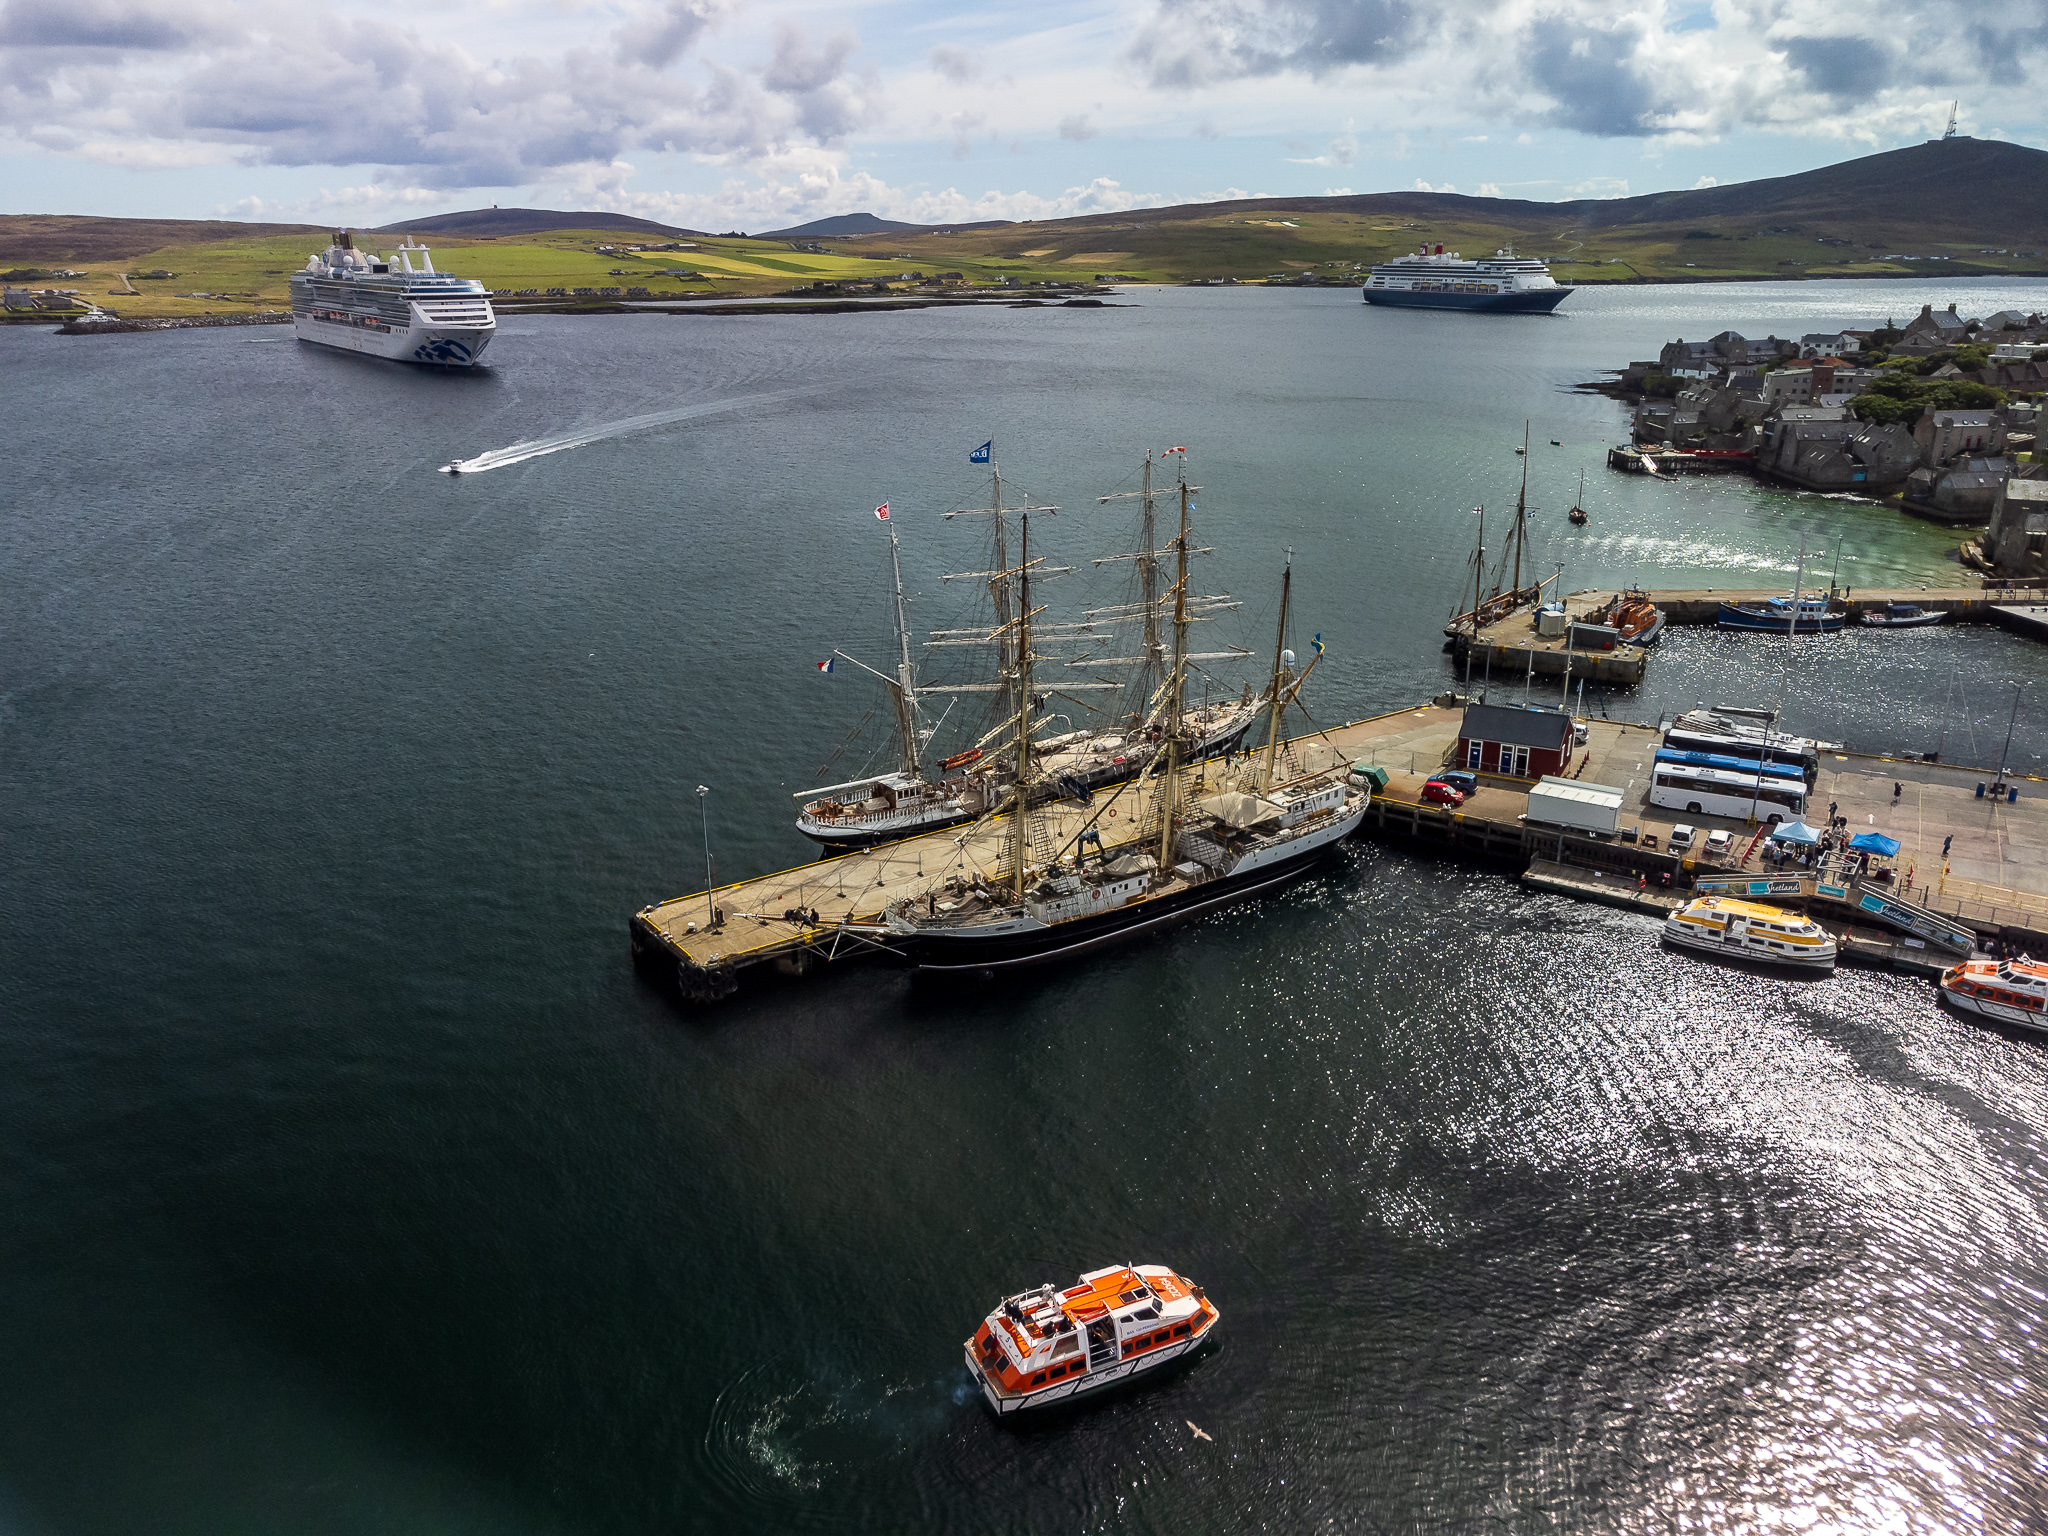 Lerwick Harbour is set to welcome around 145 cruise ships this season and will host the spectacular Tall Ships Races in July 2023. Credit: Shetland Flyer Aerial Media  (Image at LateCruiseNews.com - February 2023)